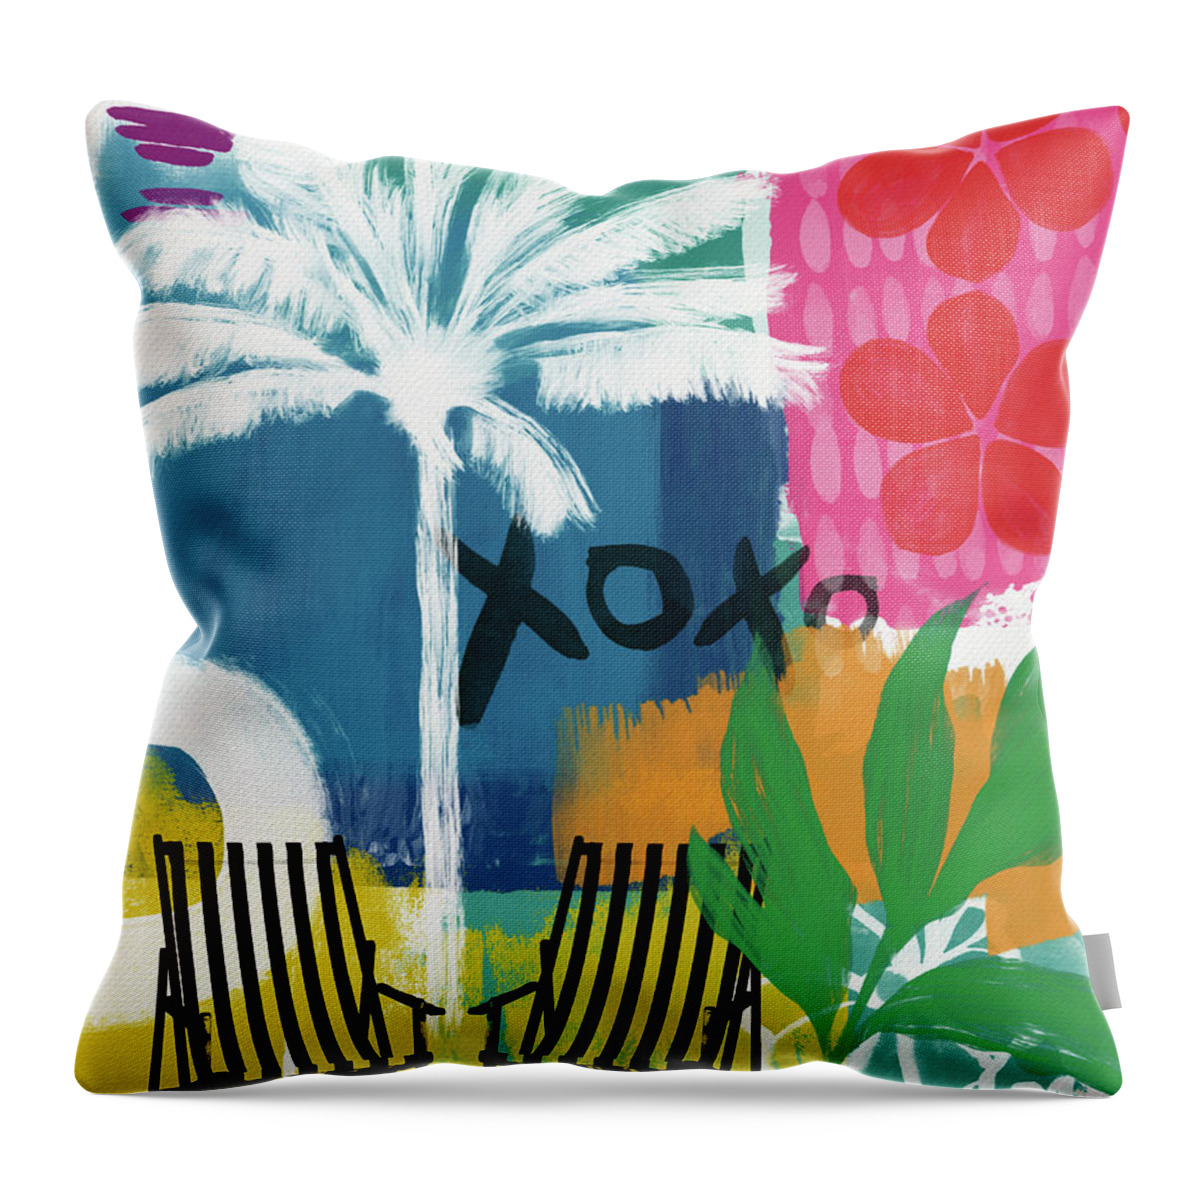 Tropical Throw Pillow featuring the mixed media Wish You Were Here- Art by Linda Woods by Linda Woods